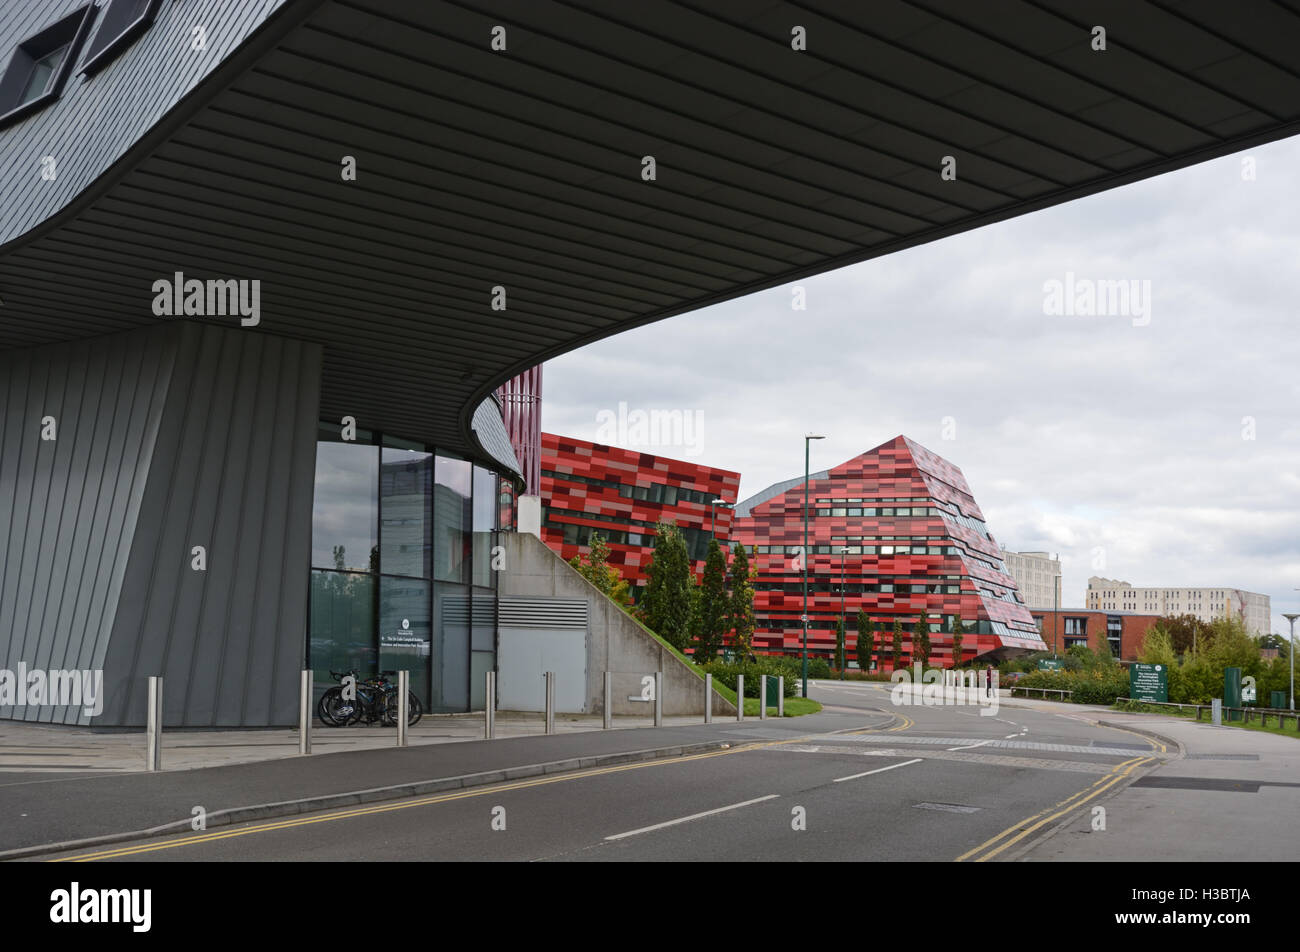 The Amenities Building, seen through the arch of the Sir Colin Campbell building, at Jubilee Campus, Nottingham University. Stock Photo